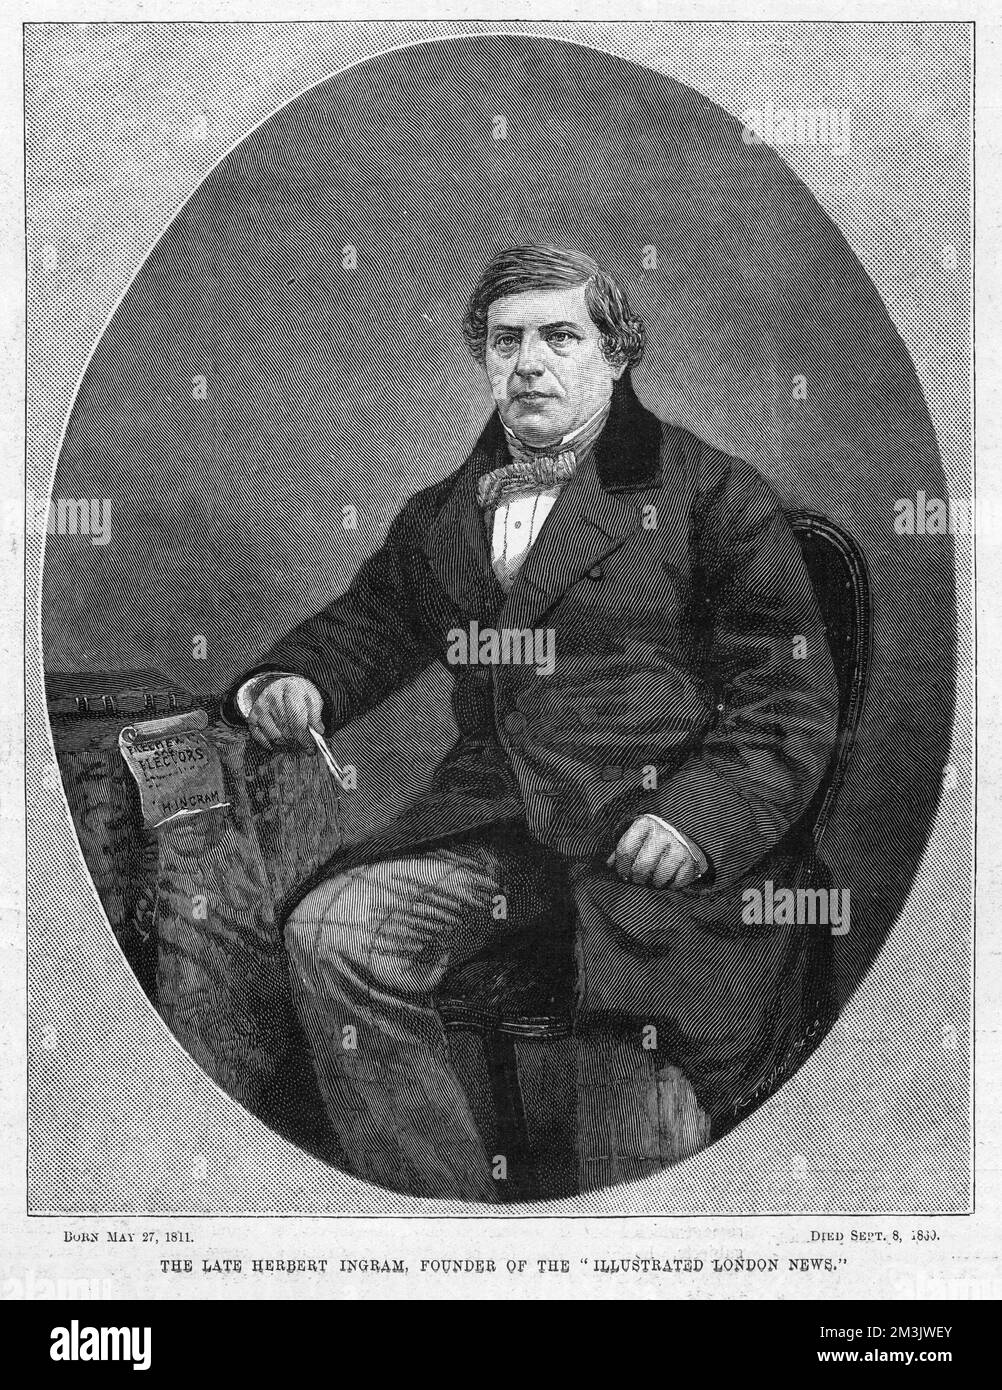 Herbert Ingram (1811 - 1860), founder of the Illustrated London News. Born in Boston, Lincolnshire, Ingram was a printer and bookseller who noticed that his customers always asked for the paper which contained illustrations. Convinced there was a market for a completely new type of publication to meet these demands, he resolved to supply one. The paper was an instant success and made Ingram's fortune. Ingram became M.P. for his home town in 1856. He was drowned, along with his eldest son Herbert, after the paddle steamer, 'The Lady Elgin', on which he was travelling, was involved in a colli Stock Photo